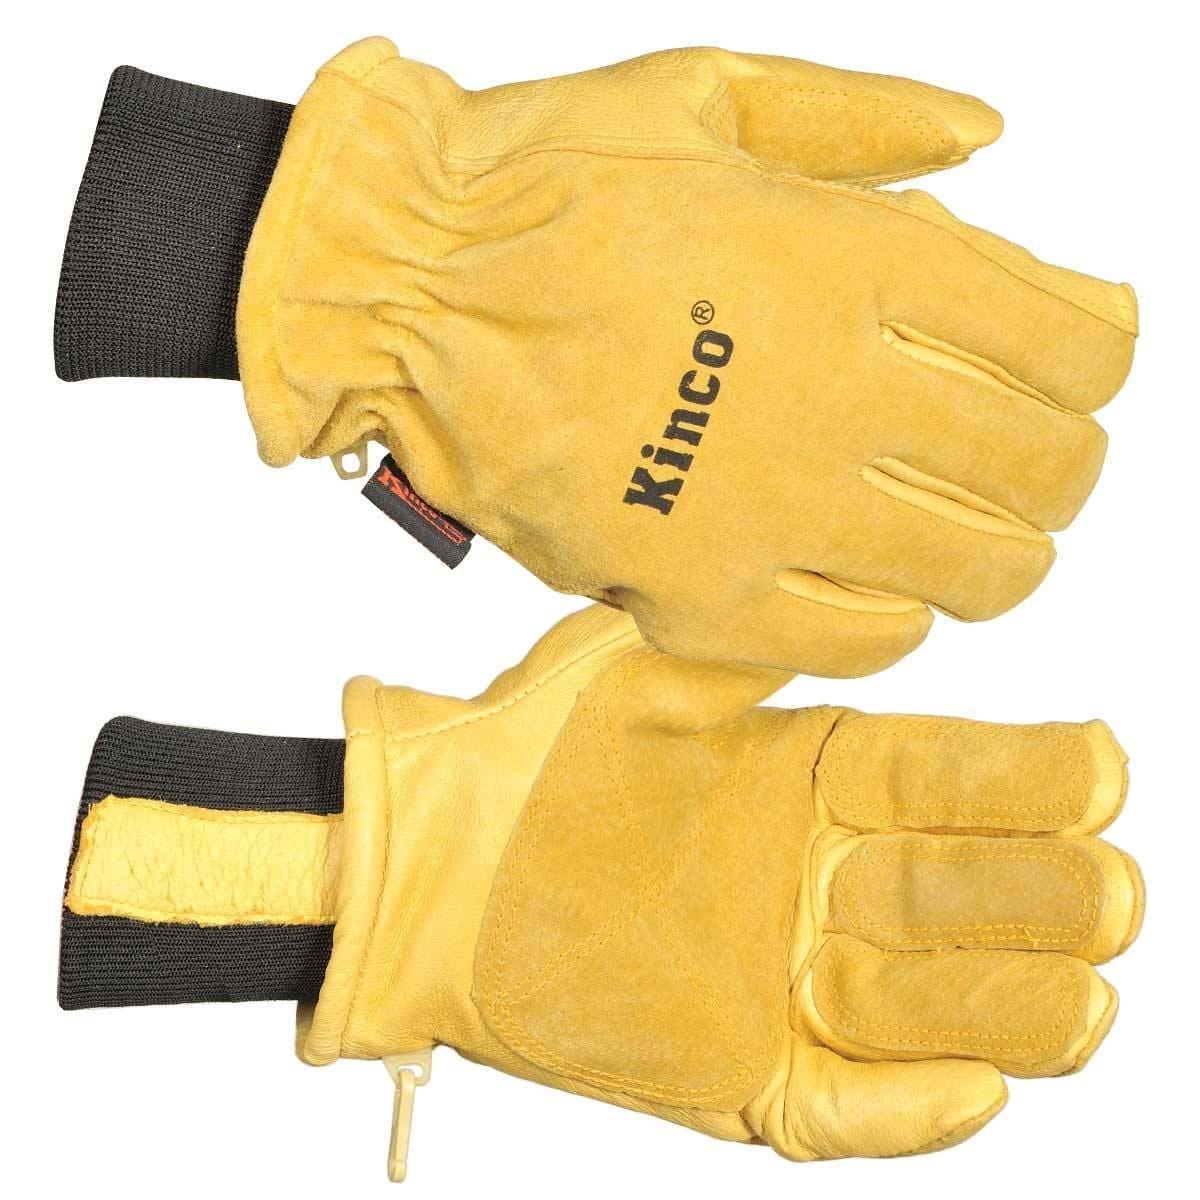 Insulated, Waterproof Gloves